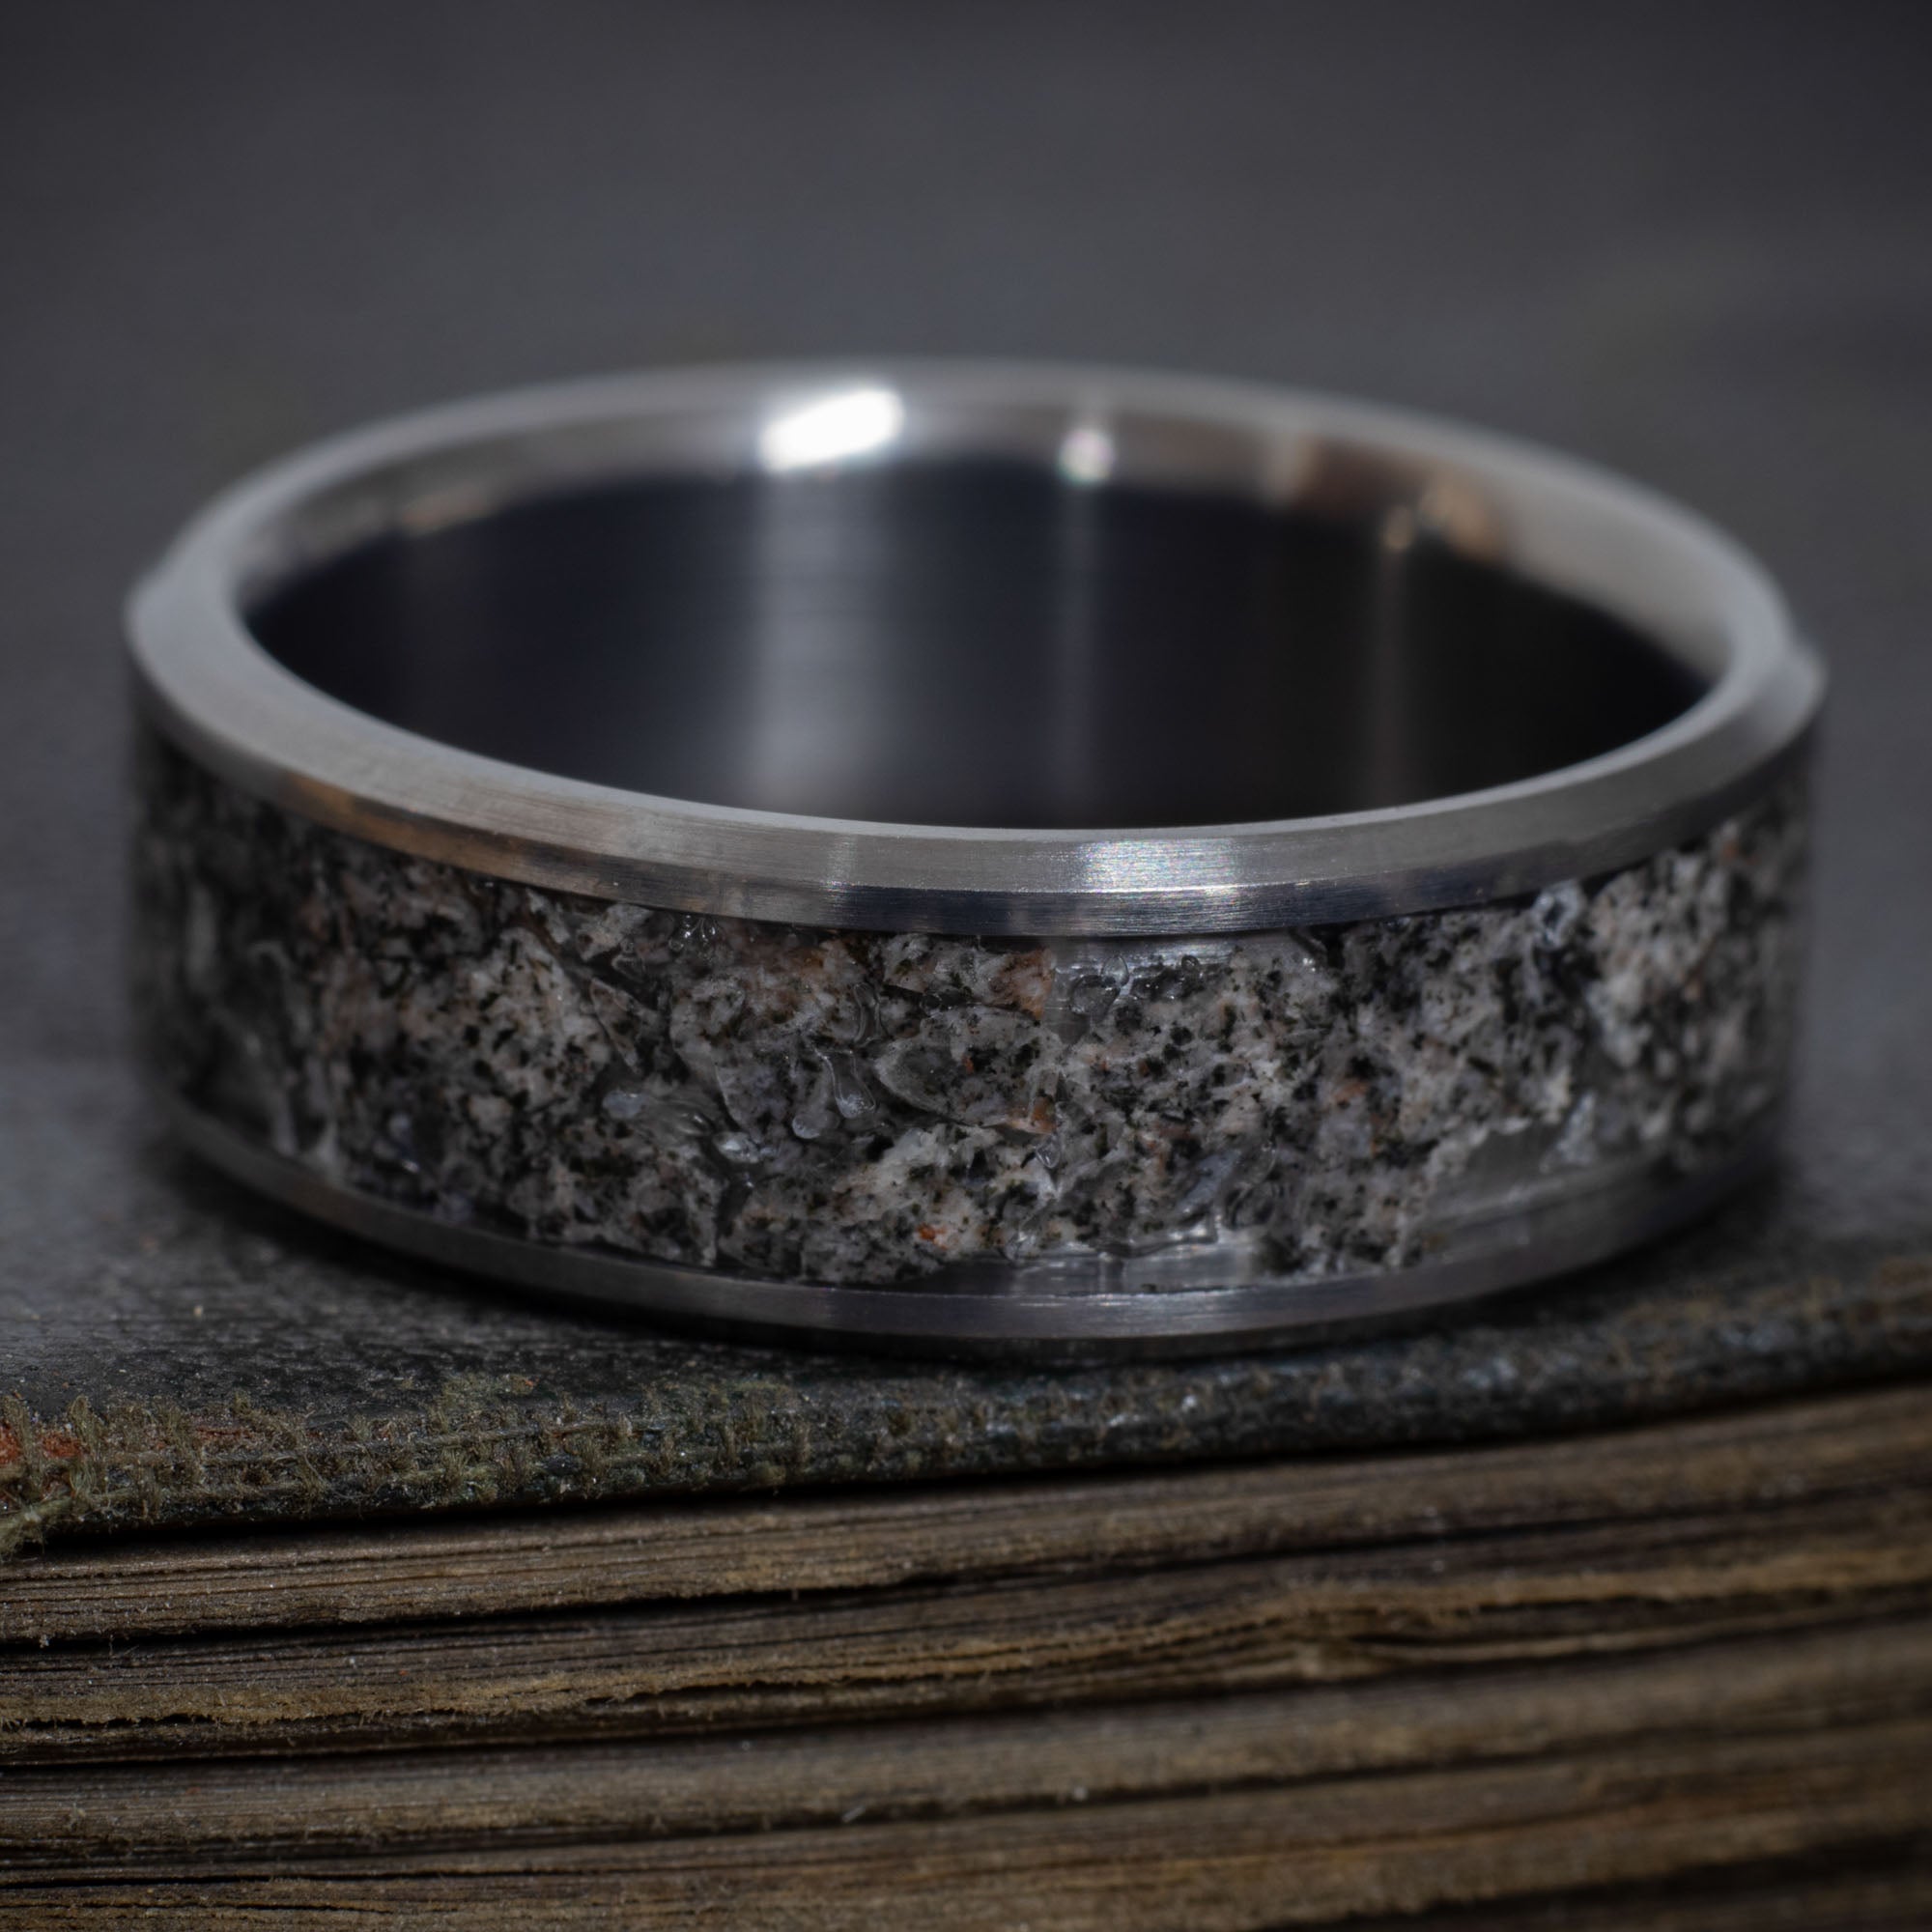 Men's Titanium Ring Inlayed With Glow Stone / Meteorite. One of a Kind  Anniversary, Wedding or Everyday Ring - Etsy